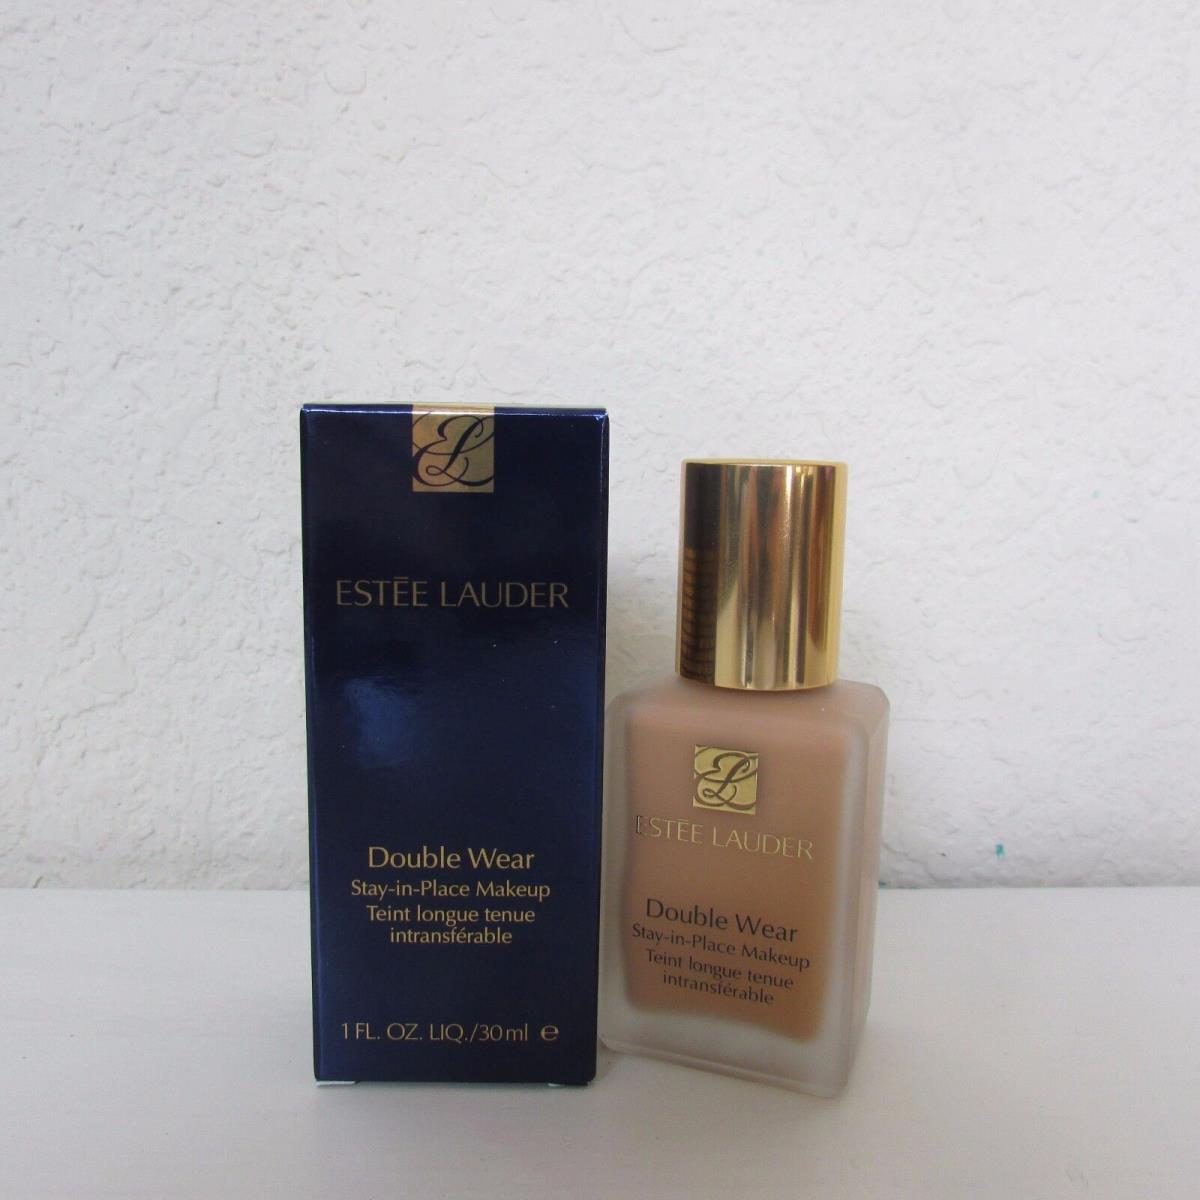 Estee Lauder Double Wear Stay-in-place Makeup Choose Your Shade 1.0 Oz/30 ml 3N2 Wheat